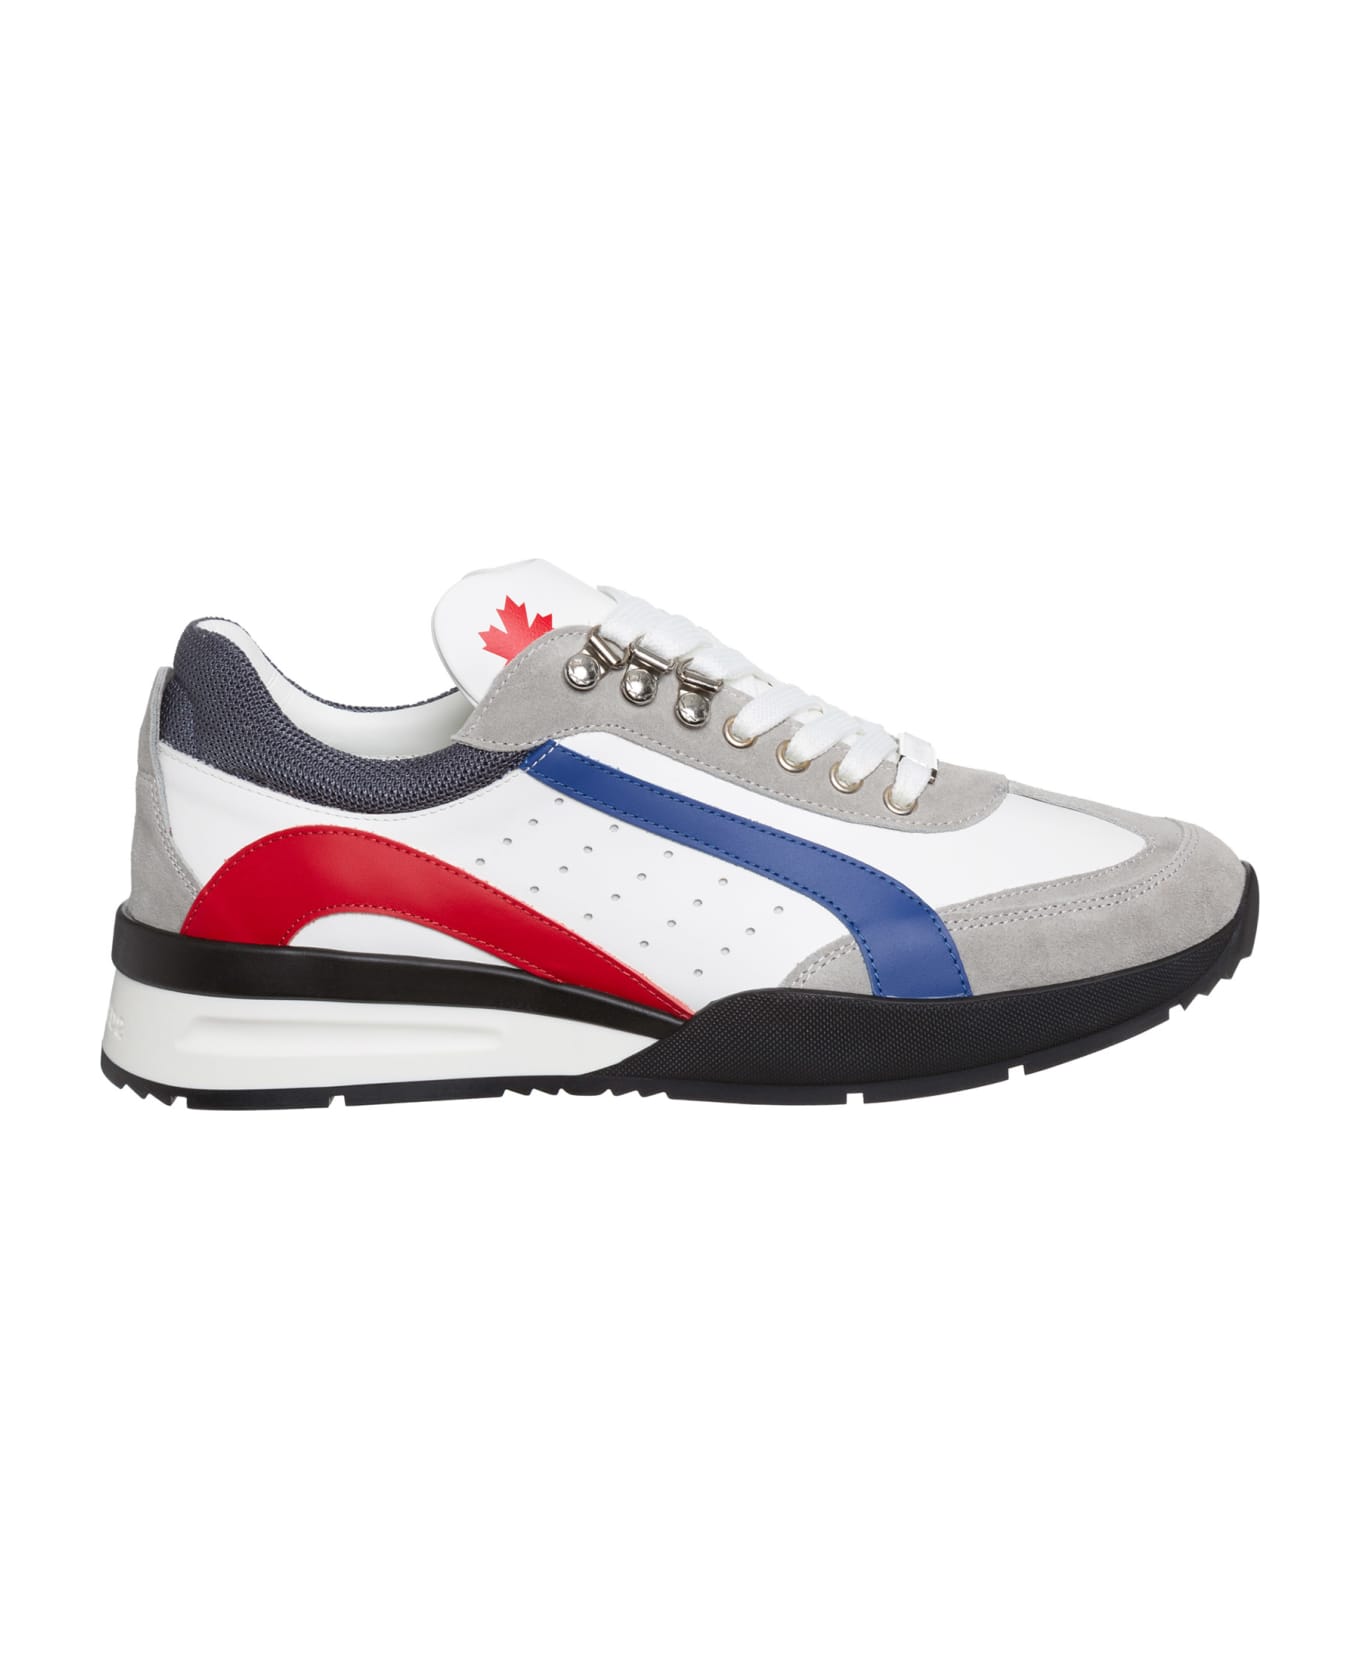 Dsquared2 Legend Leather Sneakers - White - Blue - Red